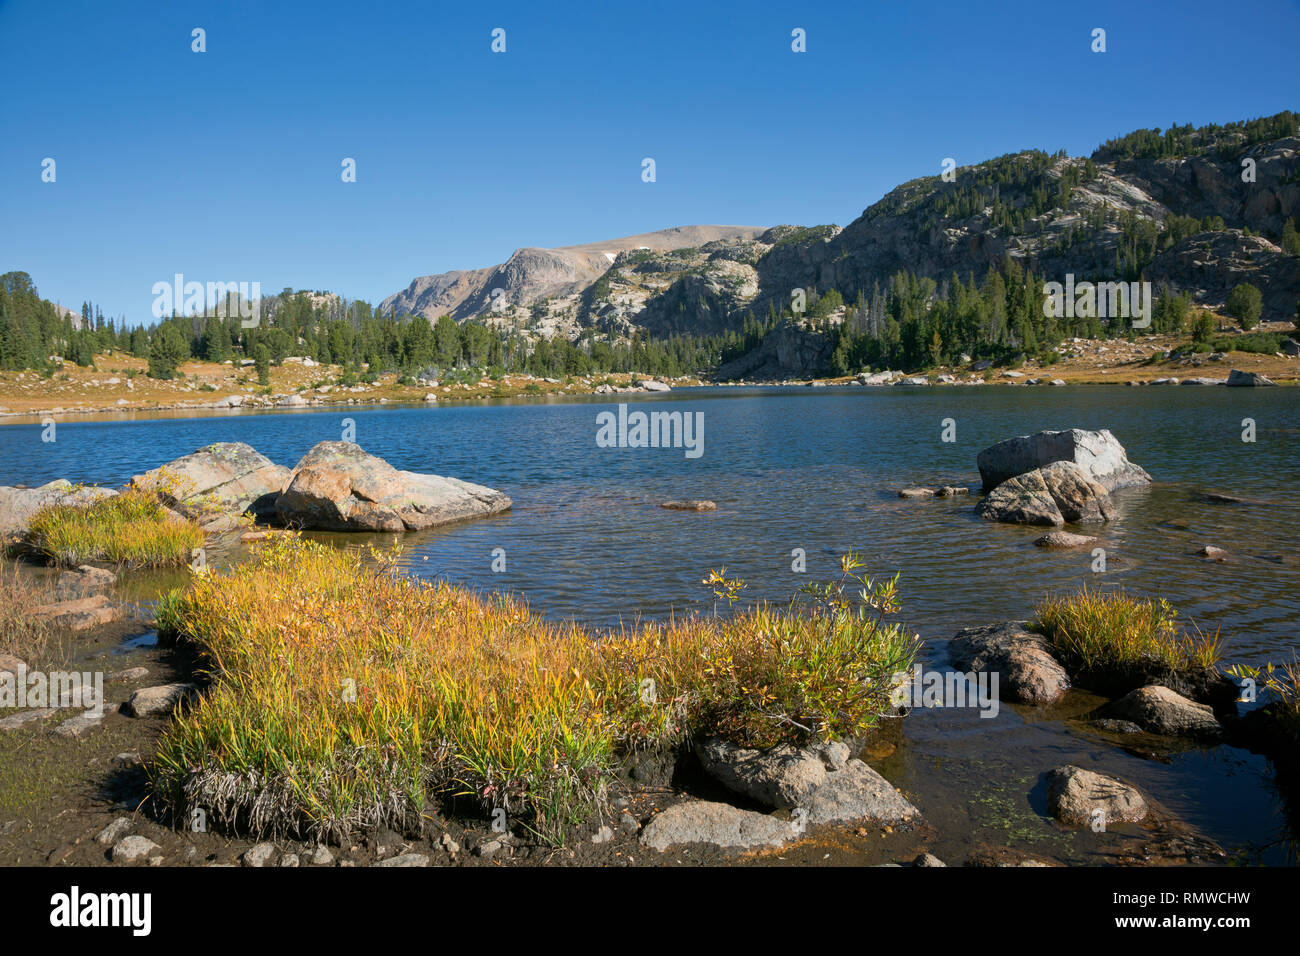 WY03759-00...WYOMING - The shoreline of a lake along the Beartooth Hghlakes Trail in the Beartooth Mountains area of the Shoshone National Forest. Stock Photo